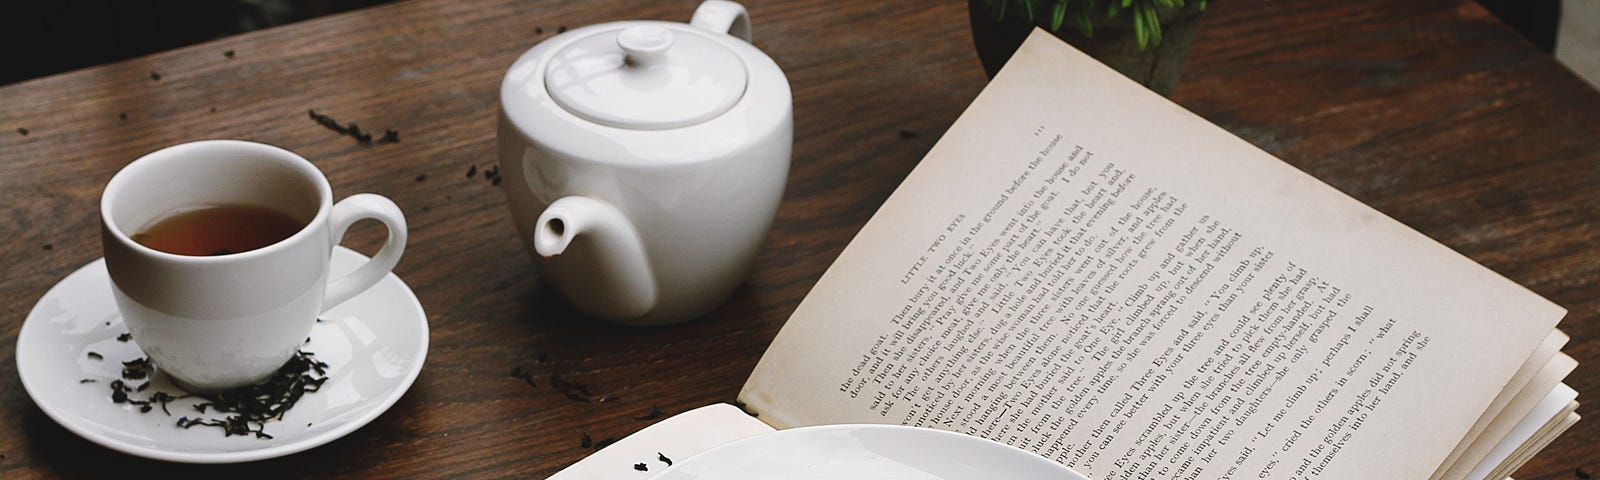 Picture of open book on wooden table with plate of dessert on top and teacup and teapot in the background